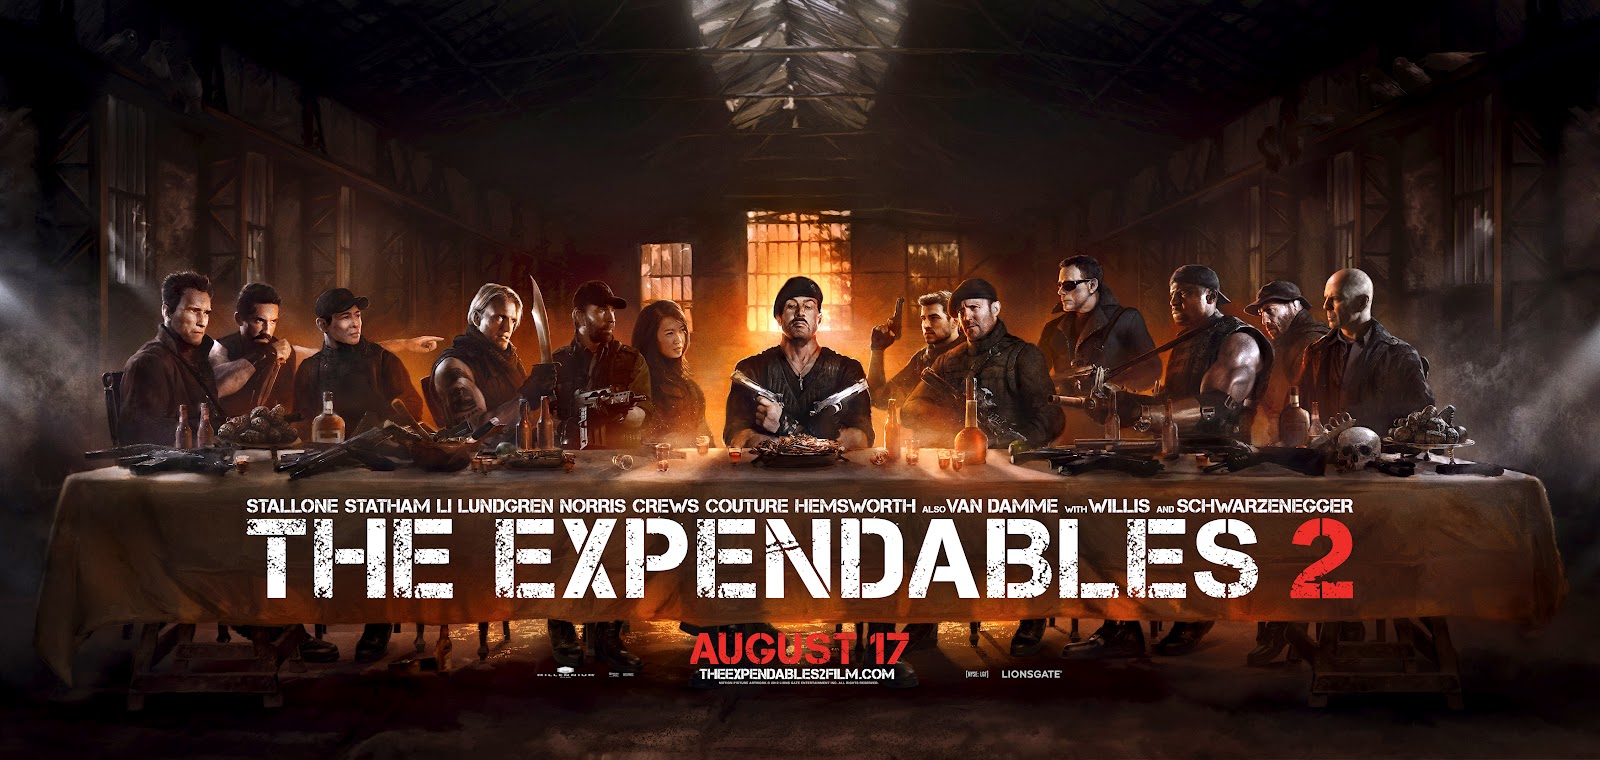 En Route pour The expendables 2 (2012) - Page 17 The-Expendables-2-Last-Supper-poster+good